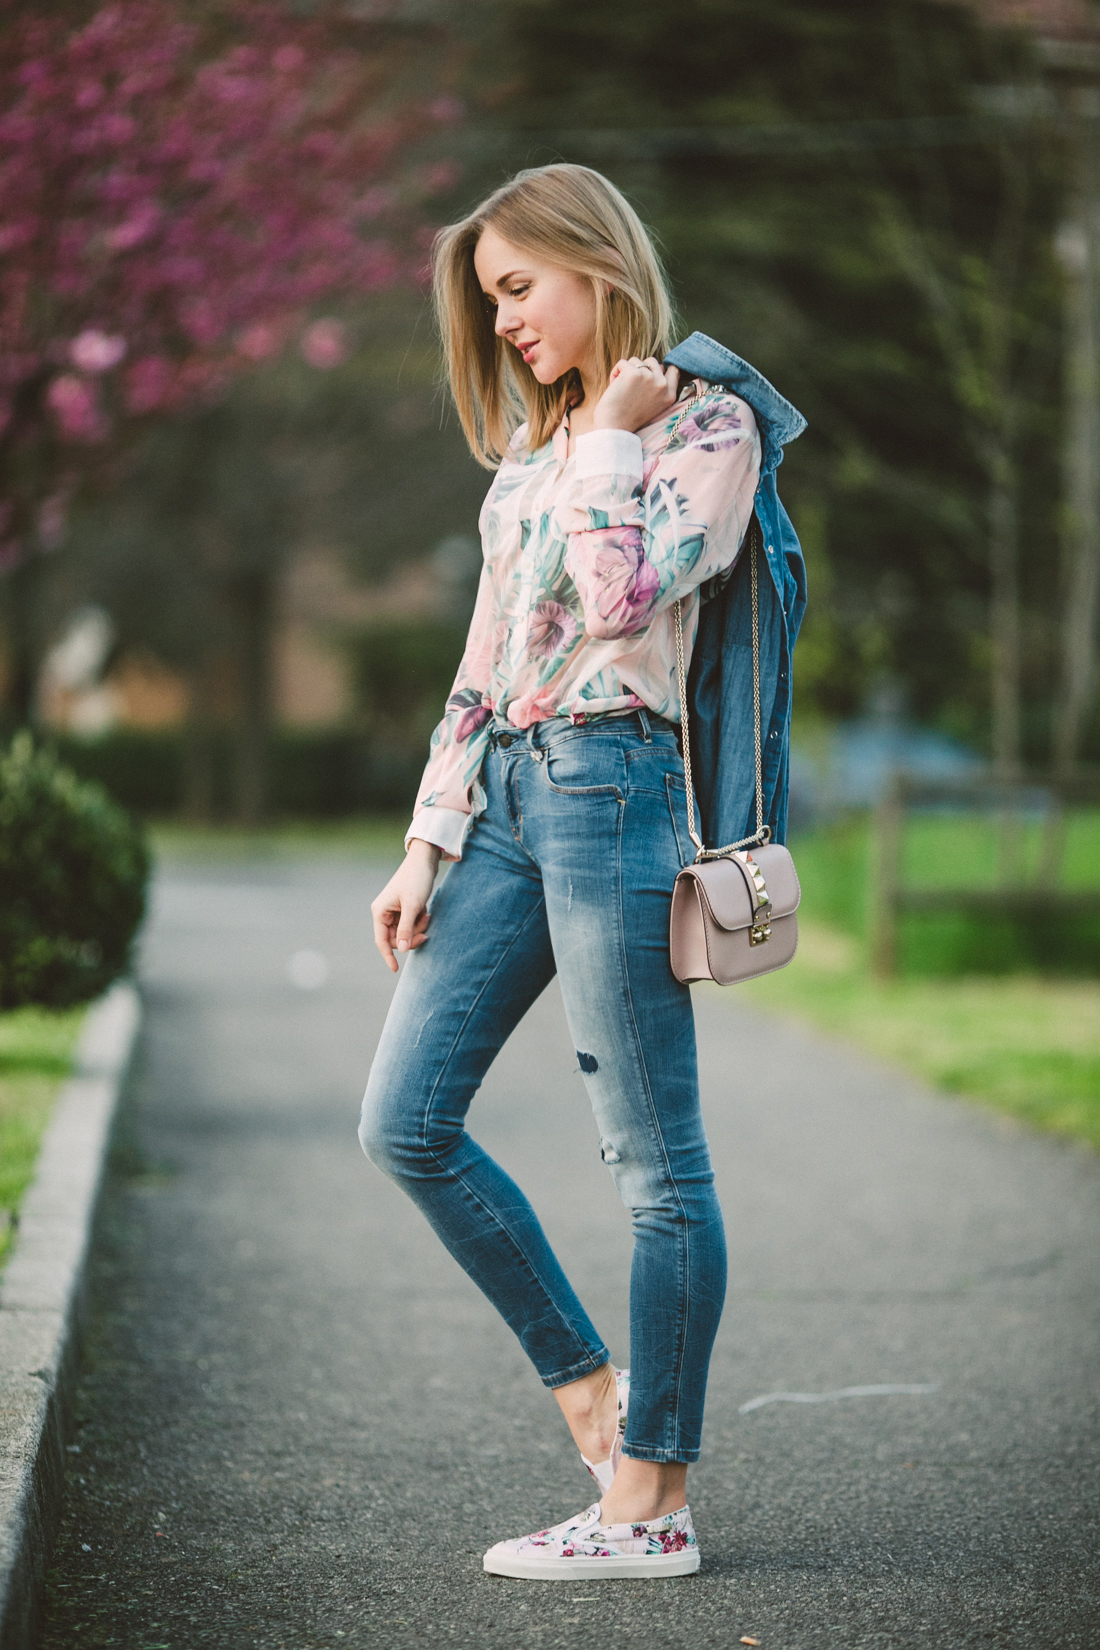 darya kamalova thecablook fashion lifestyle russian italian blogger wears total guess jeans myguess look with valentino rockstud glamrock cipria pale rose bag-4567